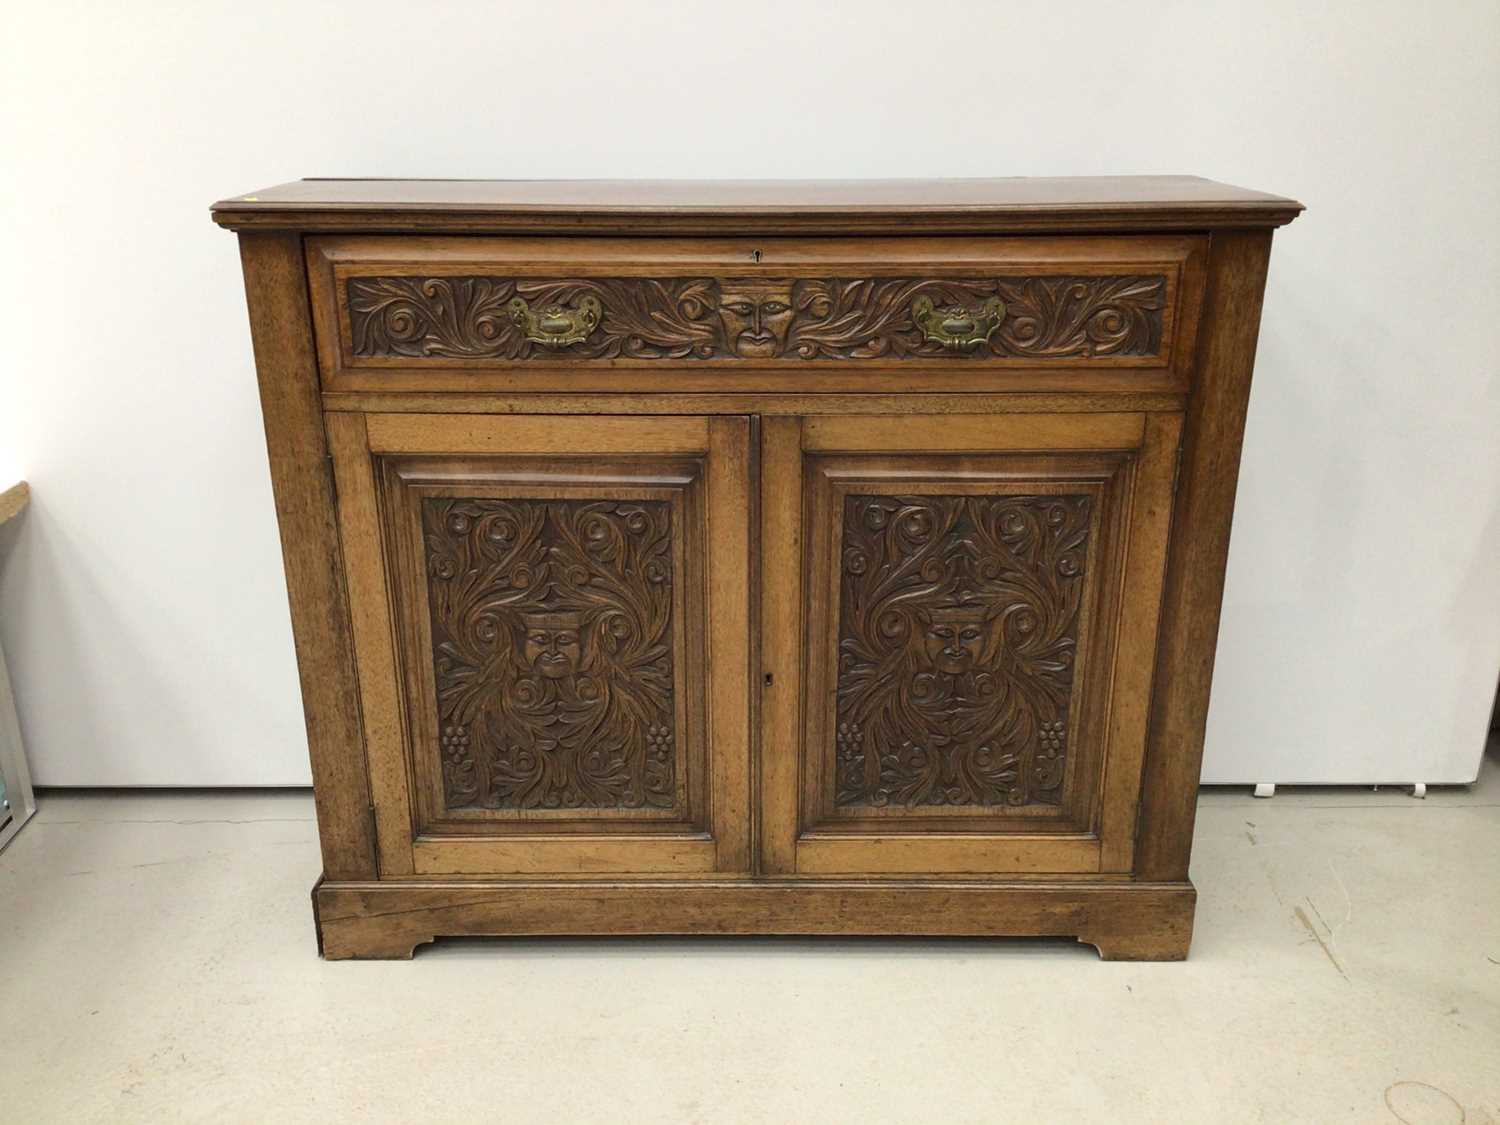 Lot 73 - Late Victorian carved walnut cupboard, with frieze drawer and pair of panelled doors belowm carved with mask and scroll ornament, 116 x 36cm deep x 98cm high